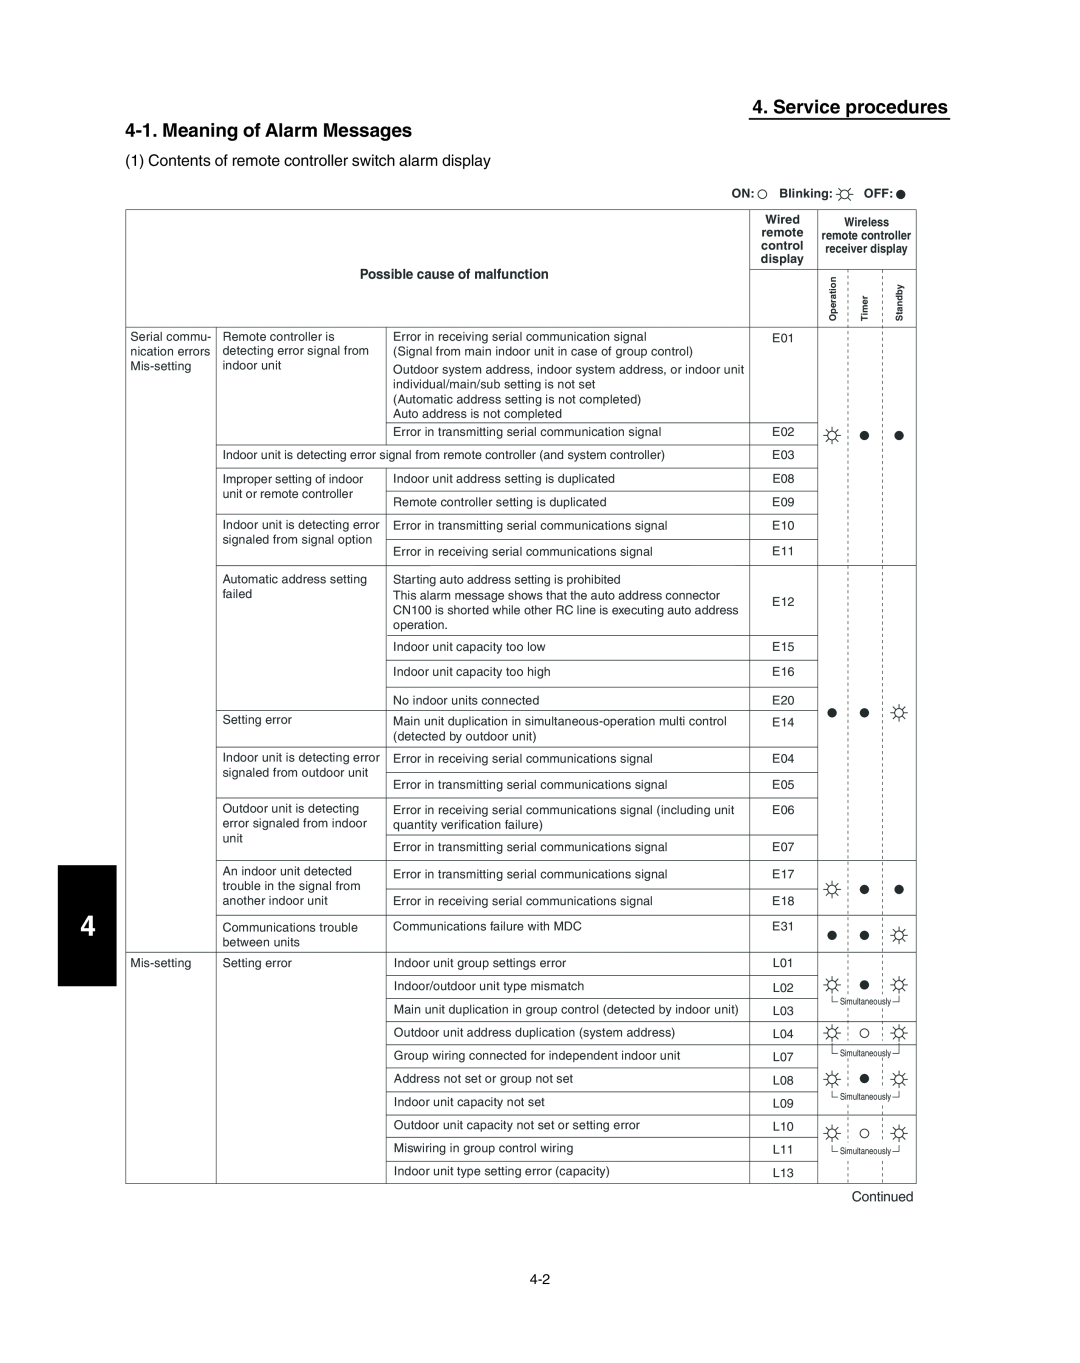 Panasonic R410A service manual Service procedures, Meaning of Alarm Messages, Blinking, Wired, remote, control, display 